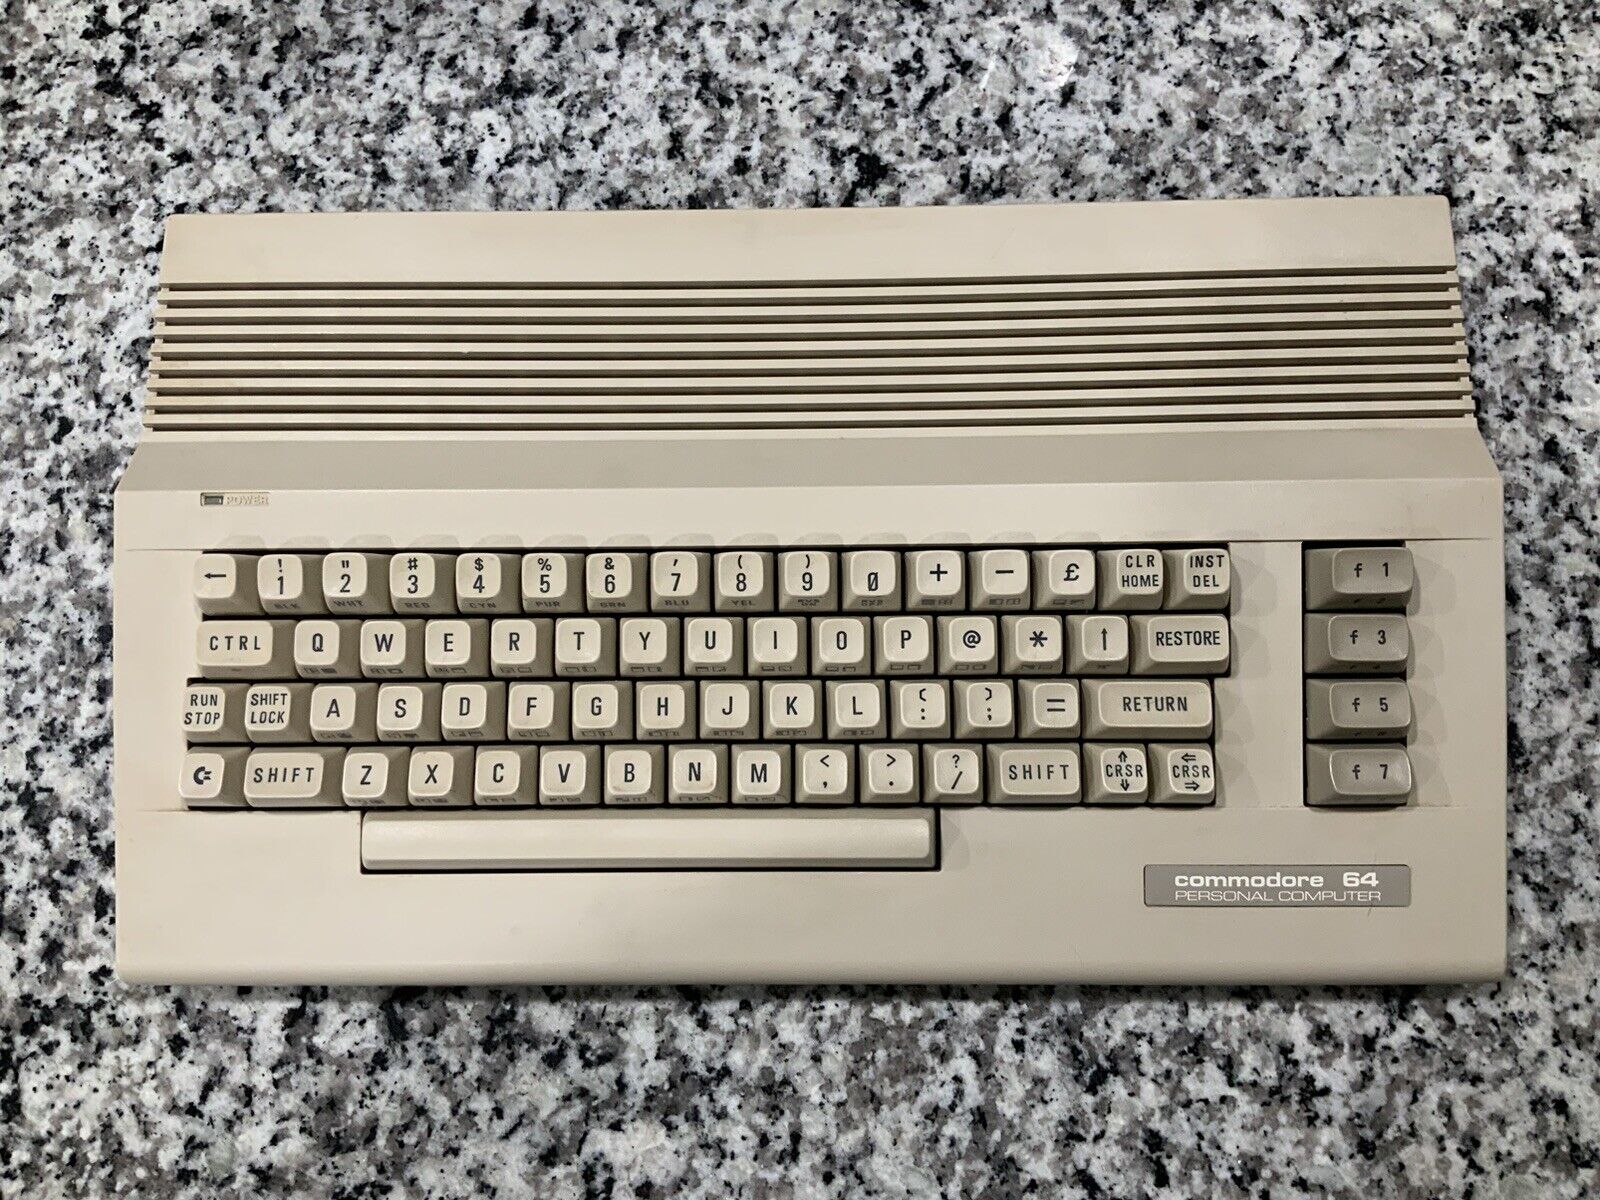 Commodore 64c Computer - Tested And Working Great